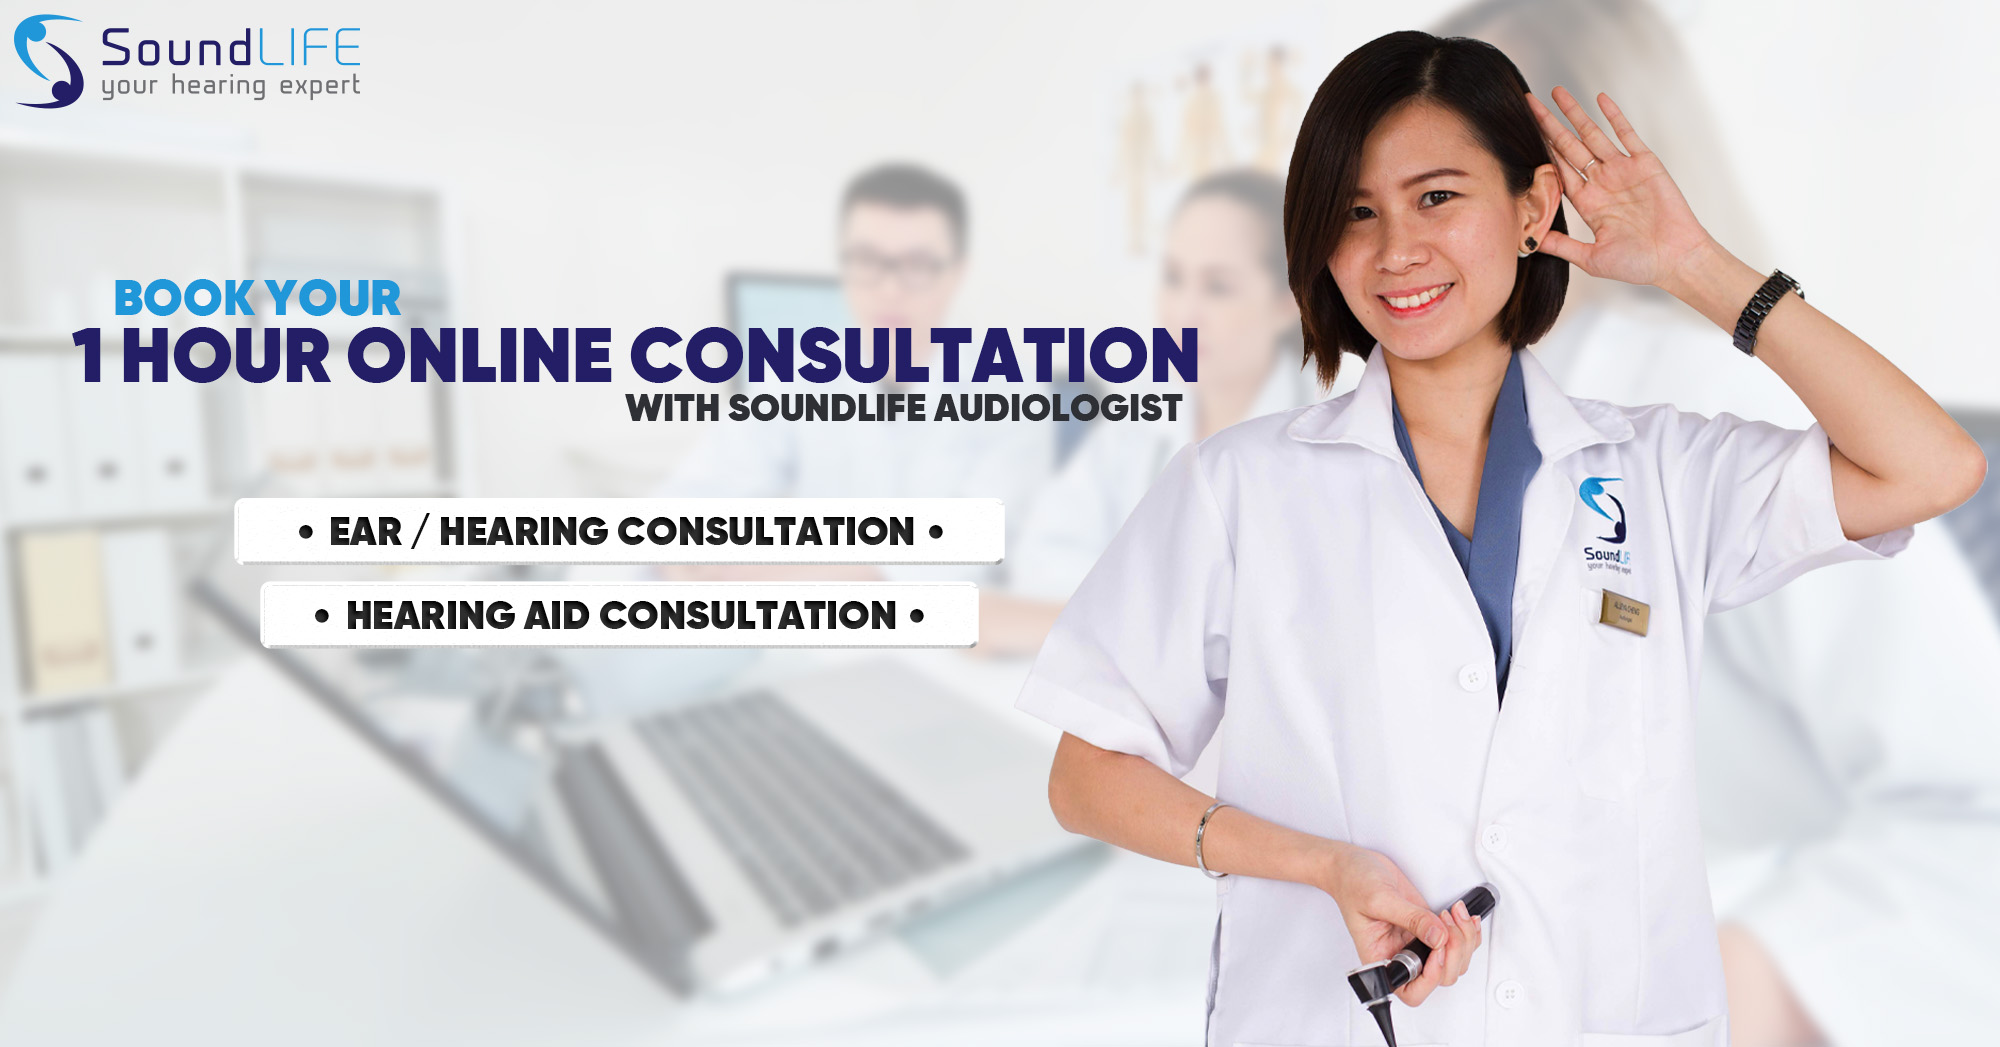 Soundlife Free 1 Hour Online Consultation On Your Hearing